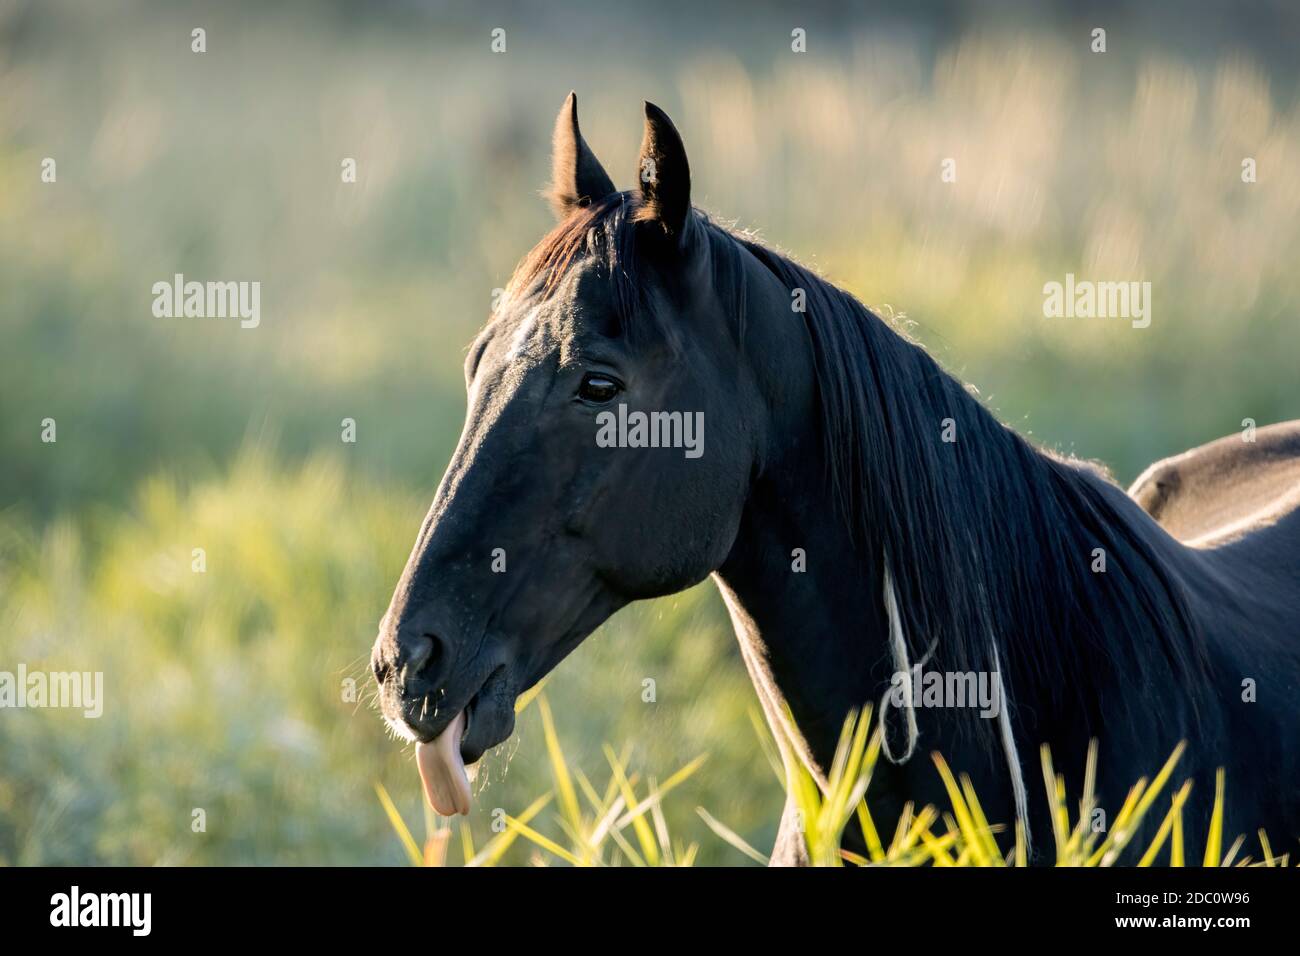 A close up portrait of a horse where it has its tongue sticking out. Stock Photo